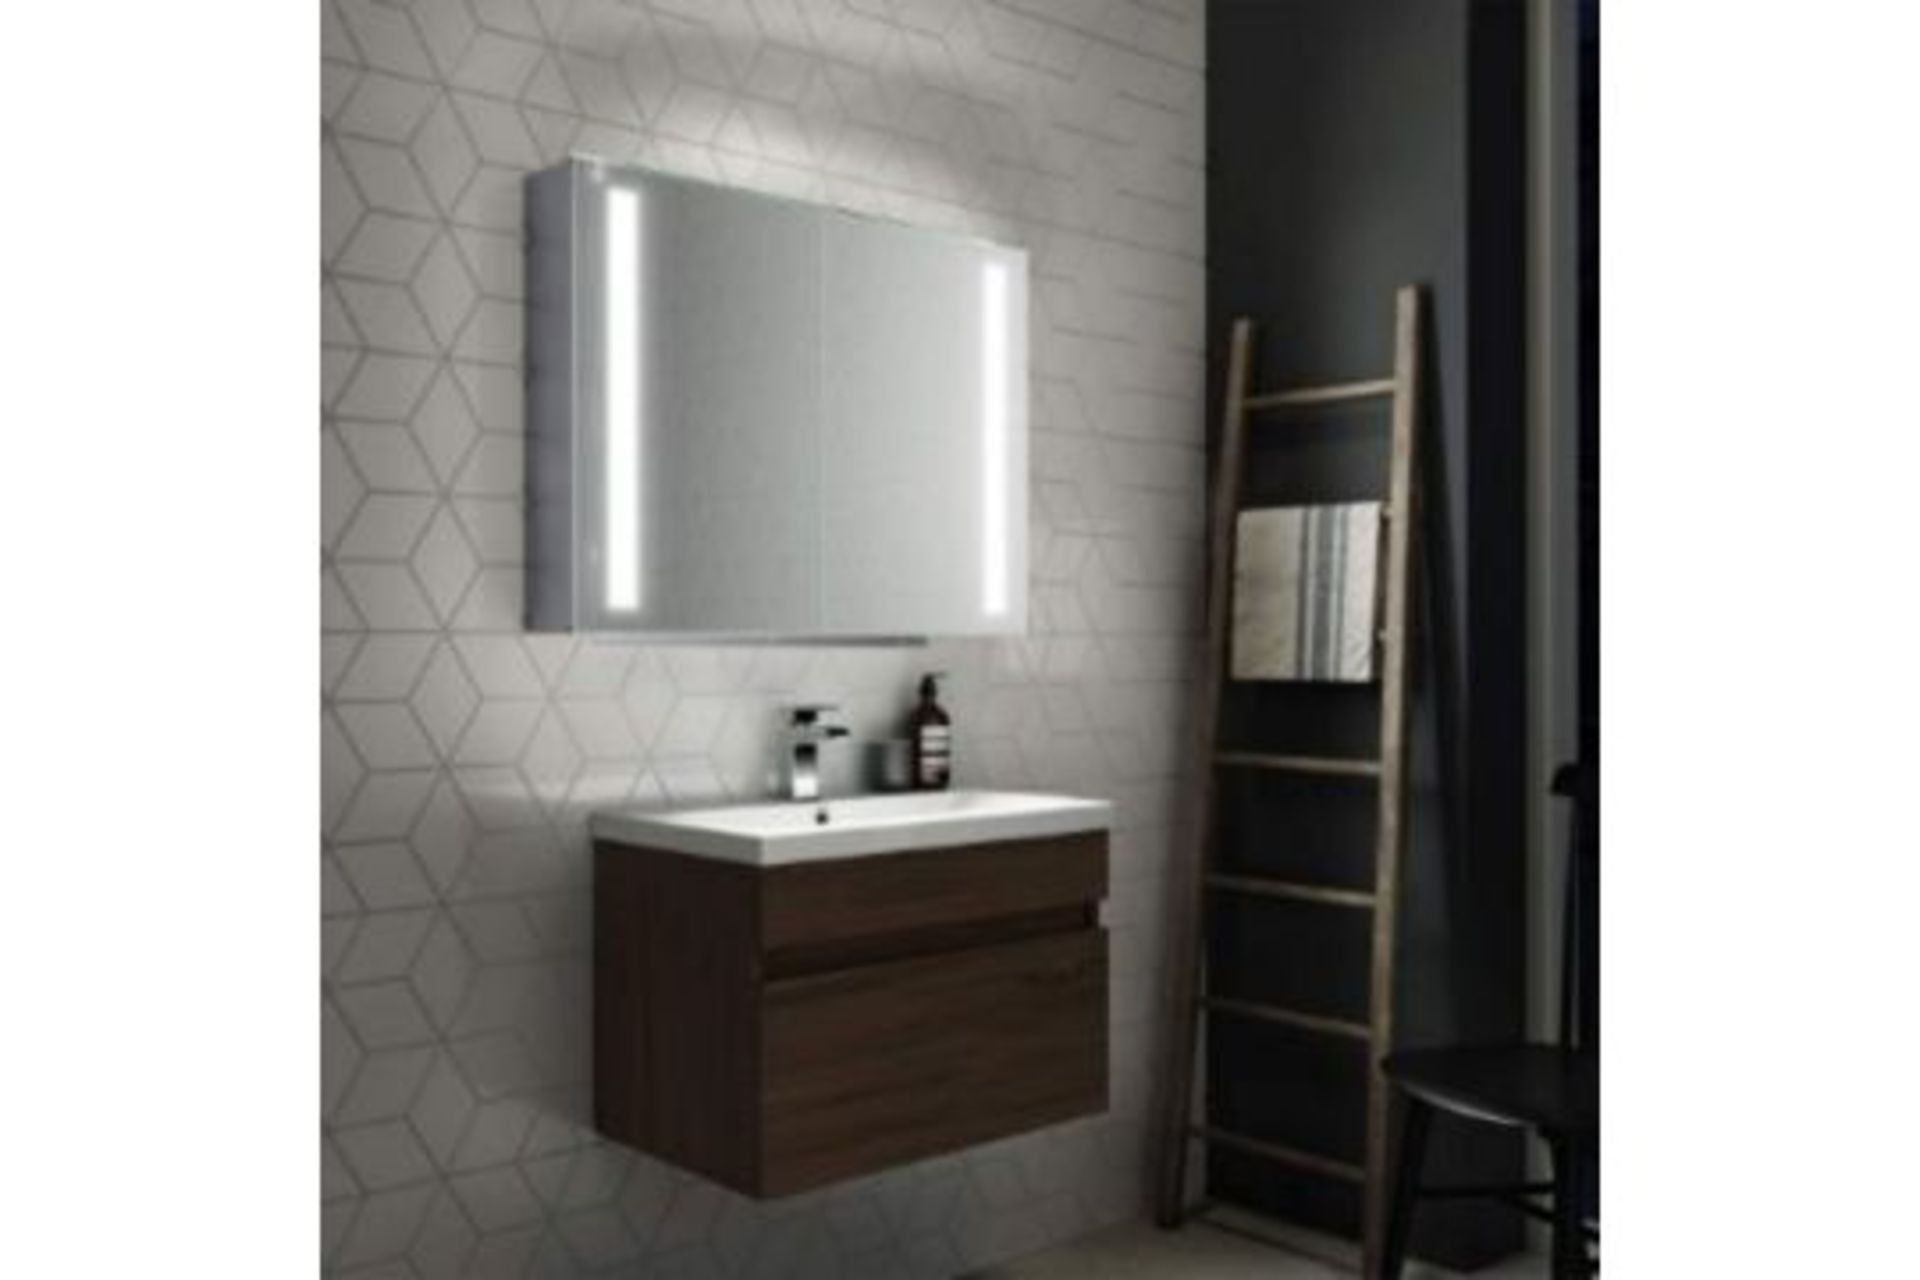 New 800 x 600 Dawn Illuminated Led Mirror Cabinet.RRP £939.99.Mc164.We Love This Mirror Cabinet As - Image 2 of 2